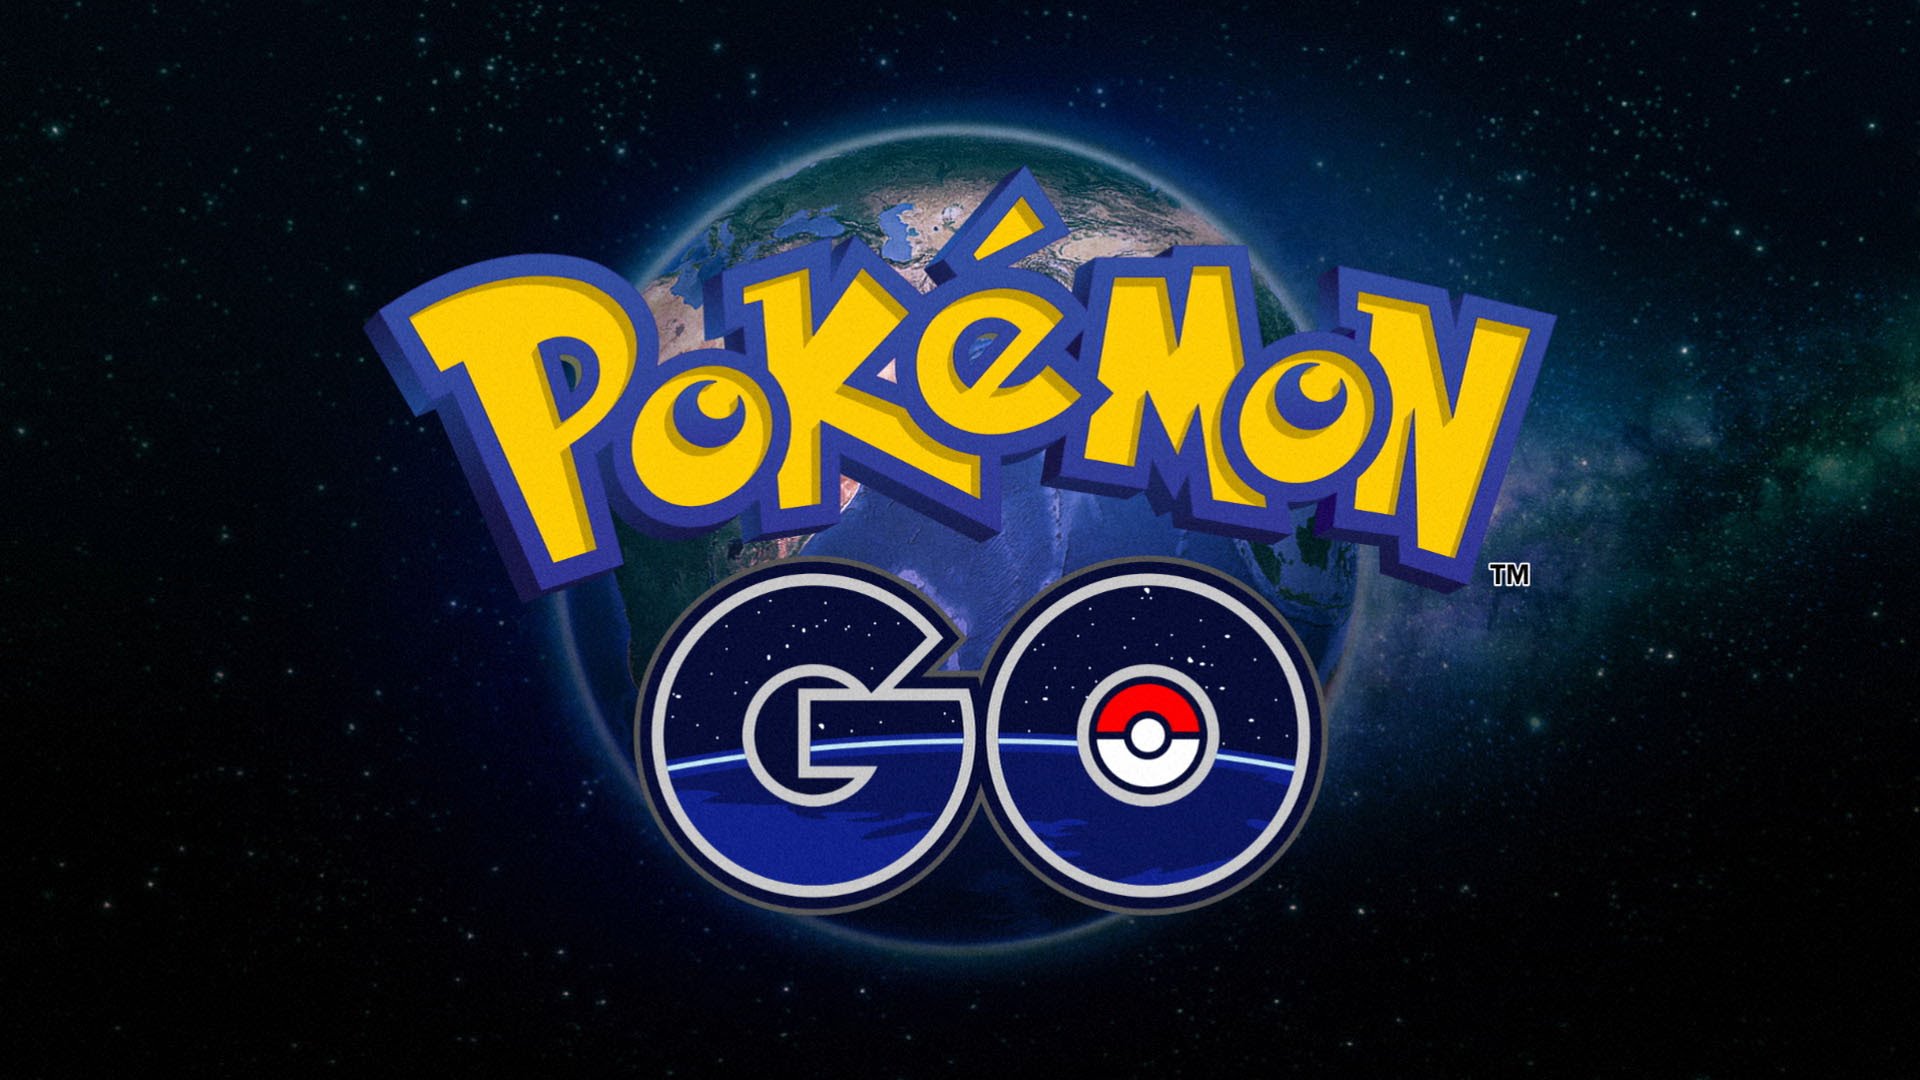 Pokémon Go: How to Profit by Making a Player into a Customer